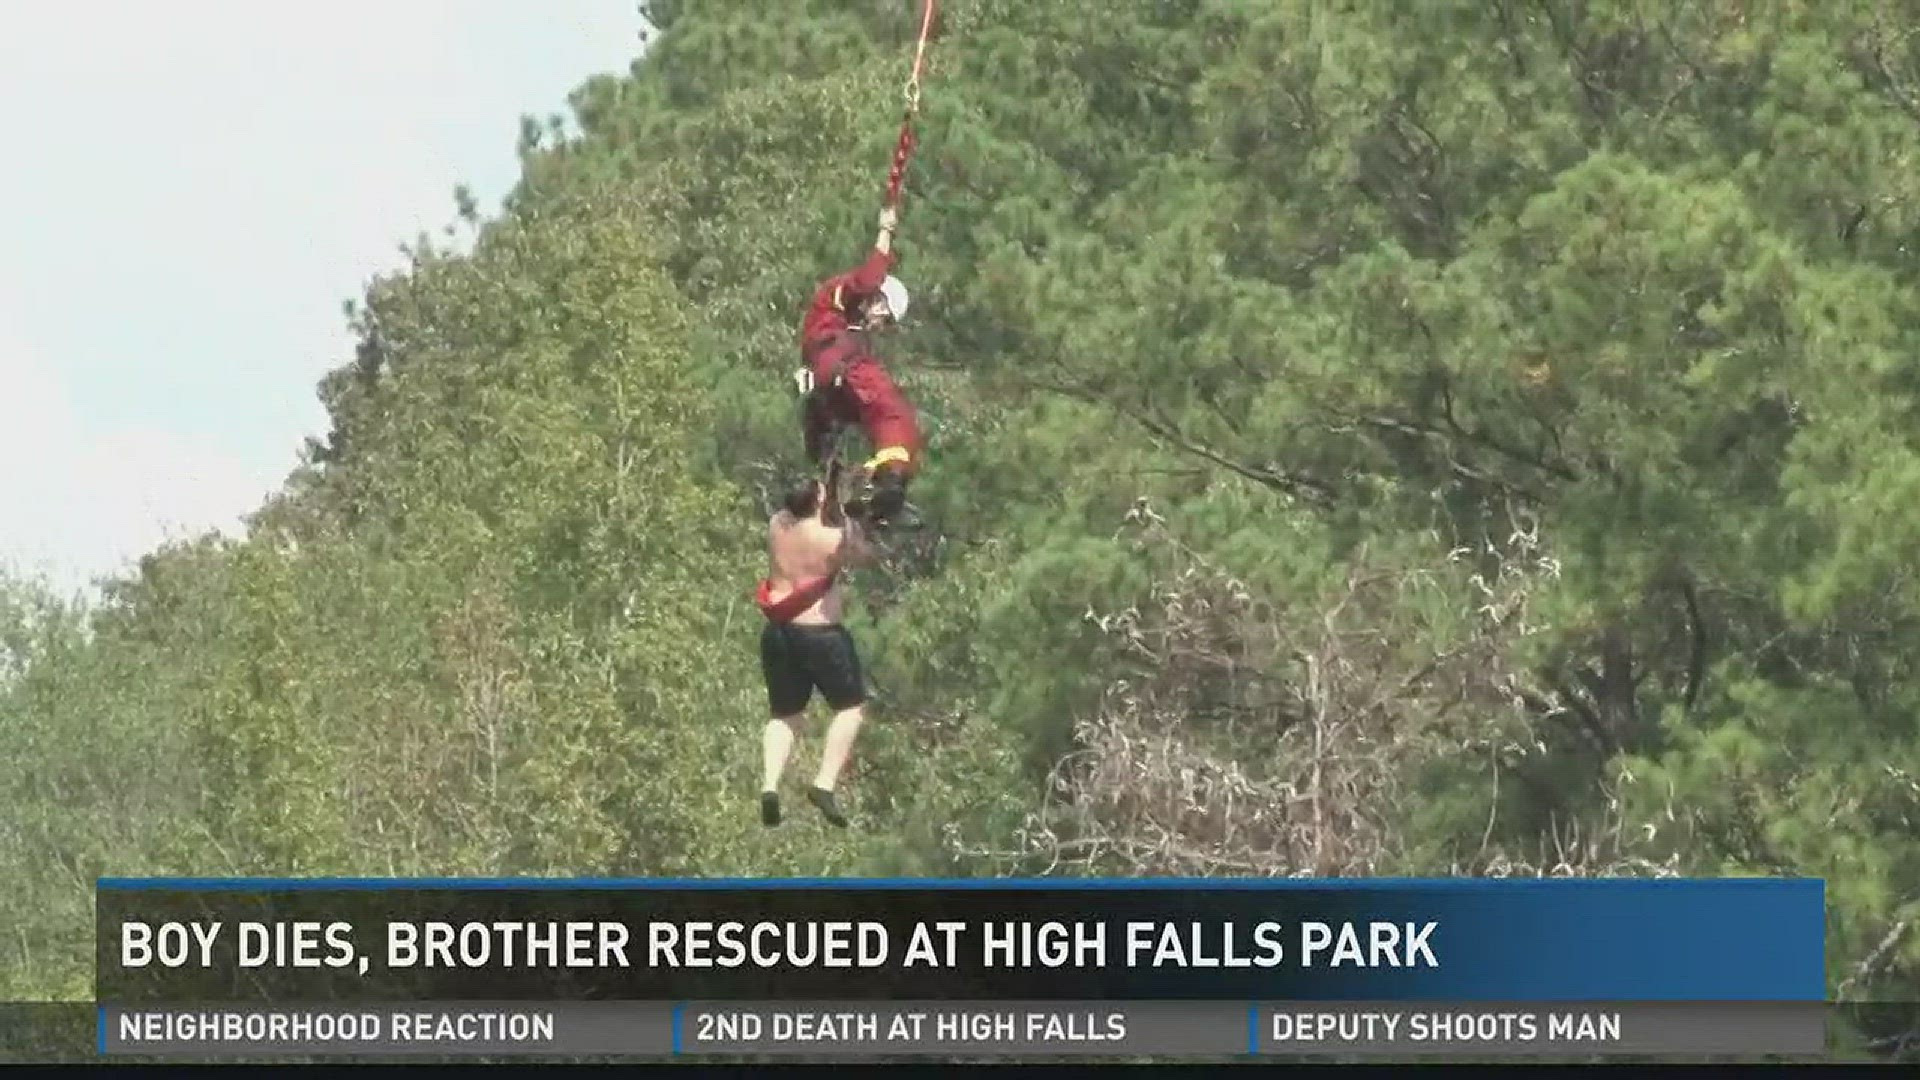 12-year-old dies at High Falls Park, his 17-year-old brother rescued by helicopter.